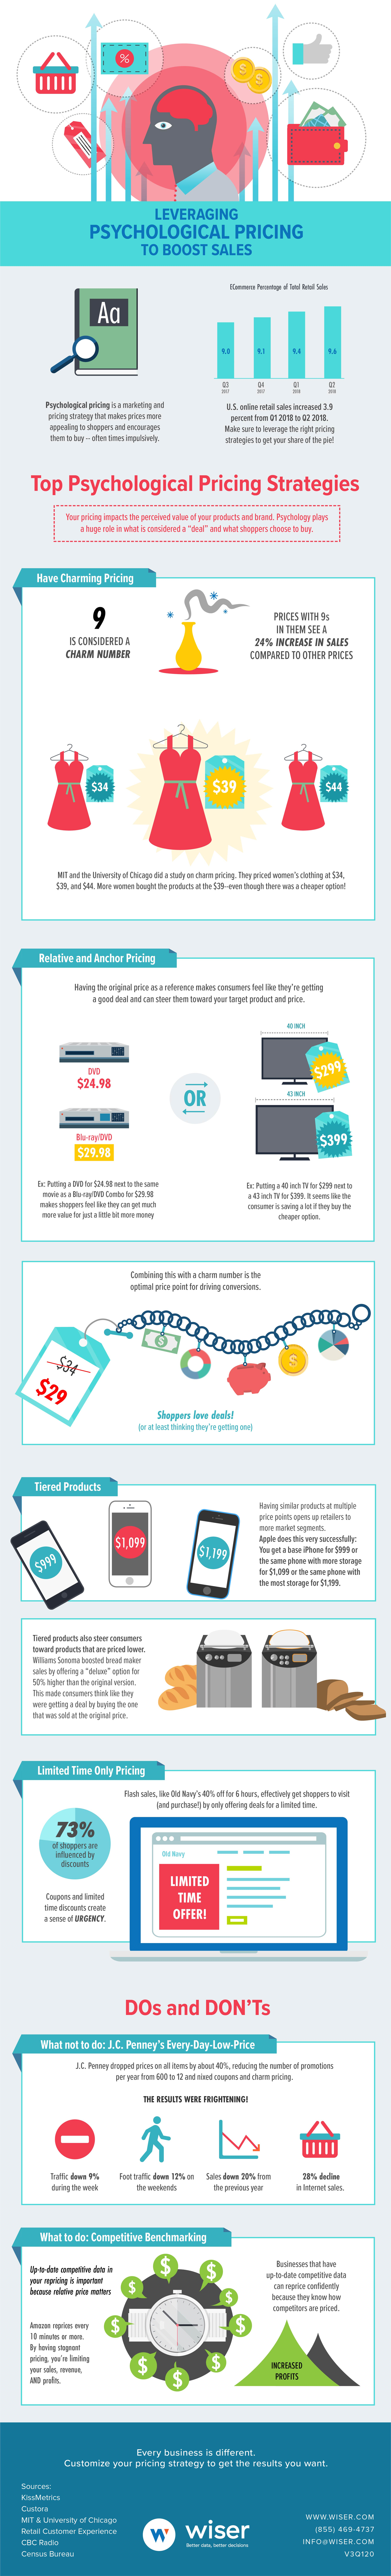 Infographic Psychological Pricing